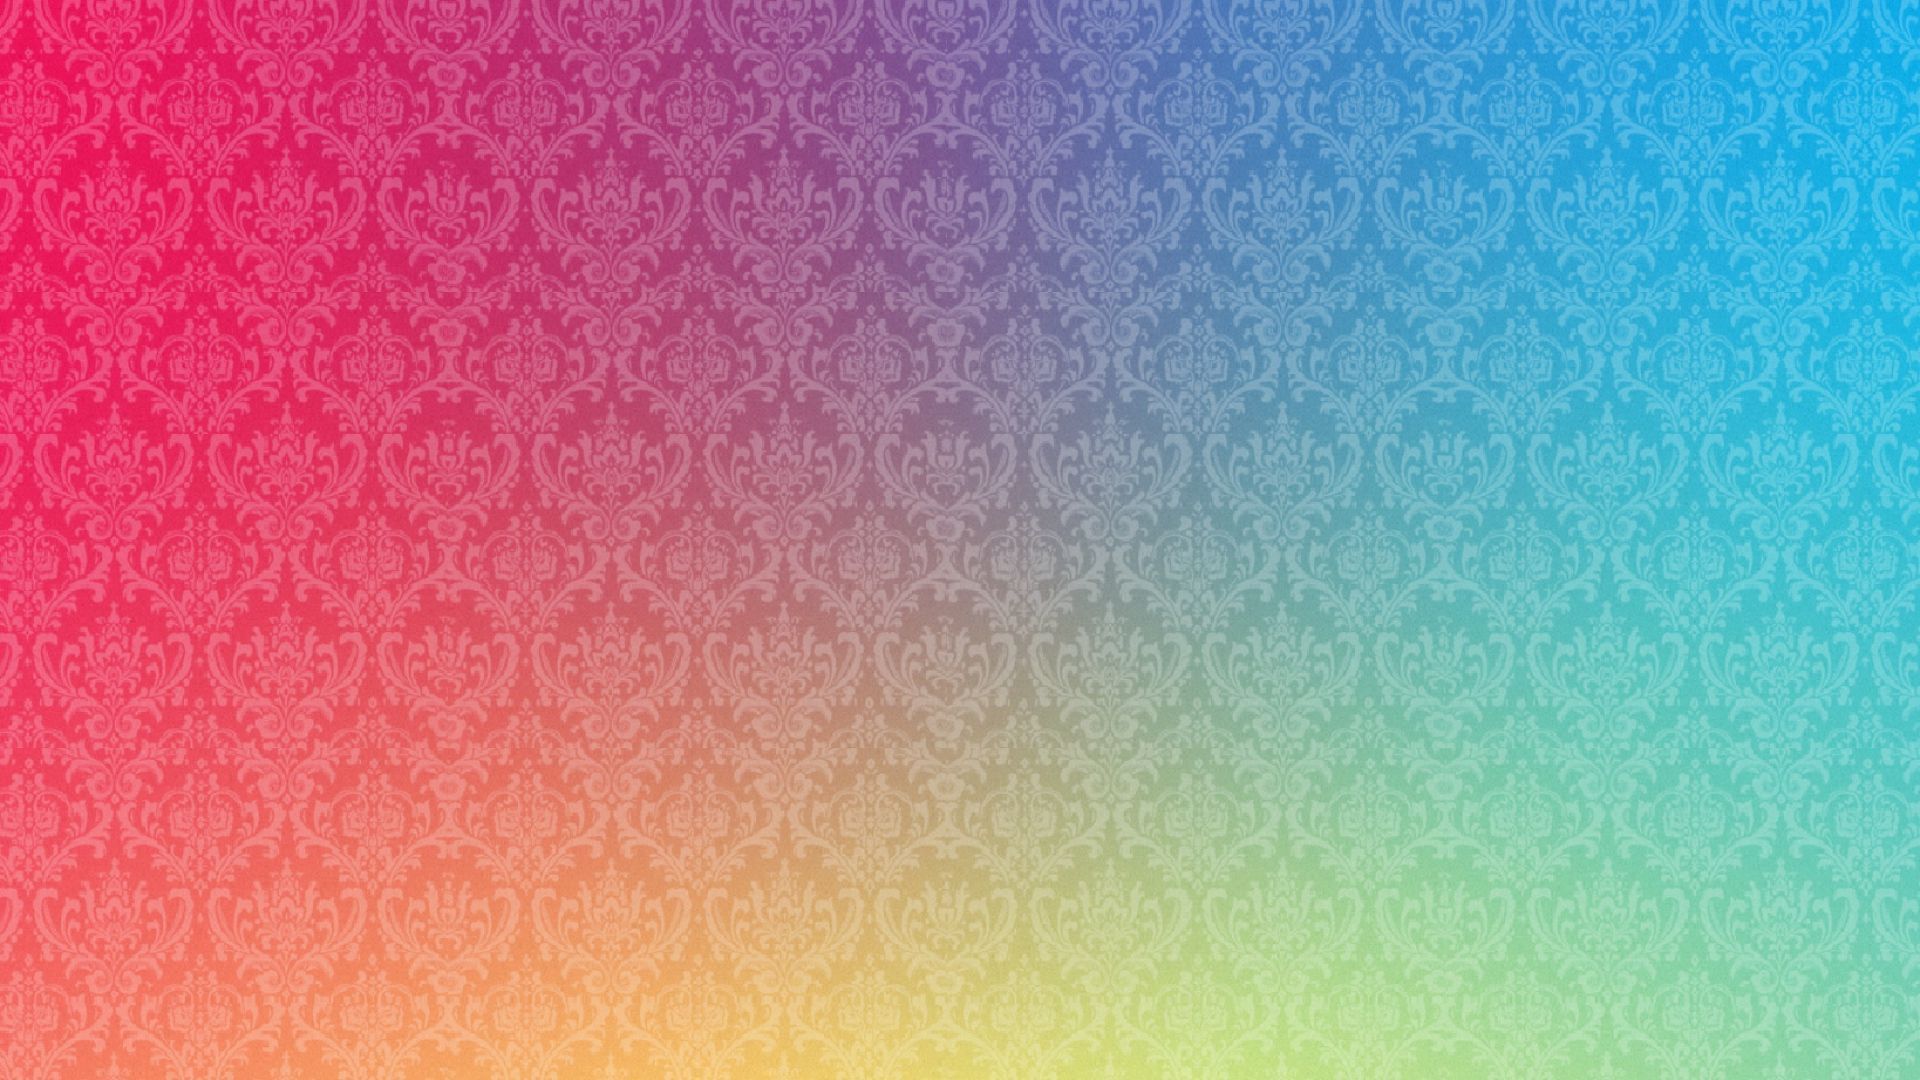 Download Wallpaper 1920x1080 Patterns, Colorful, Background ...